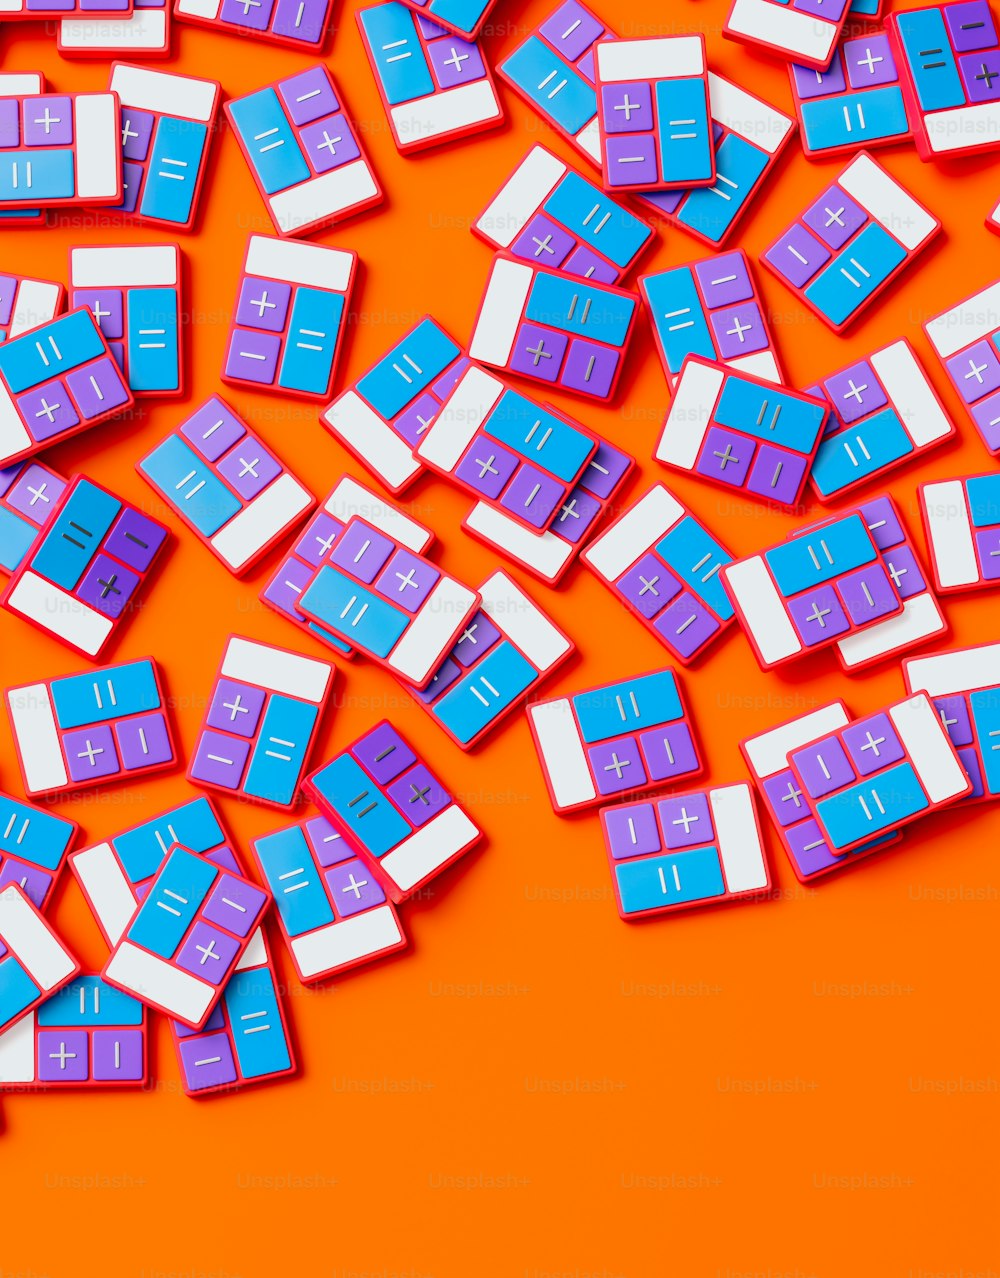 a pile of blue and white keys on an orange background